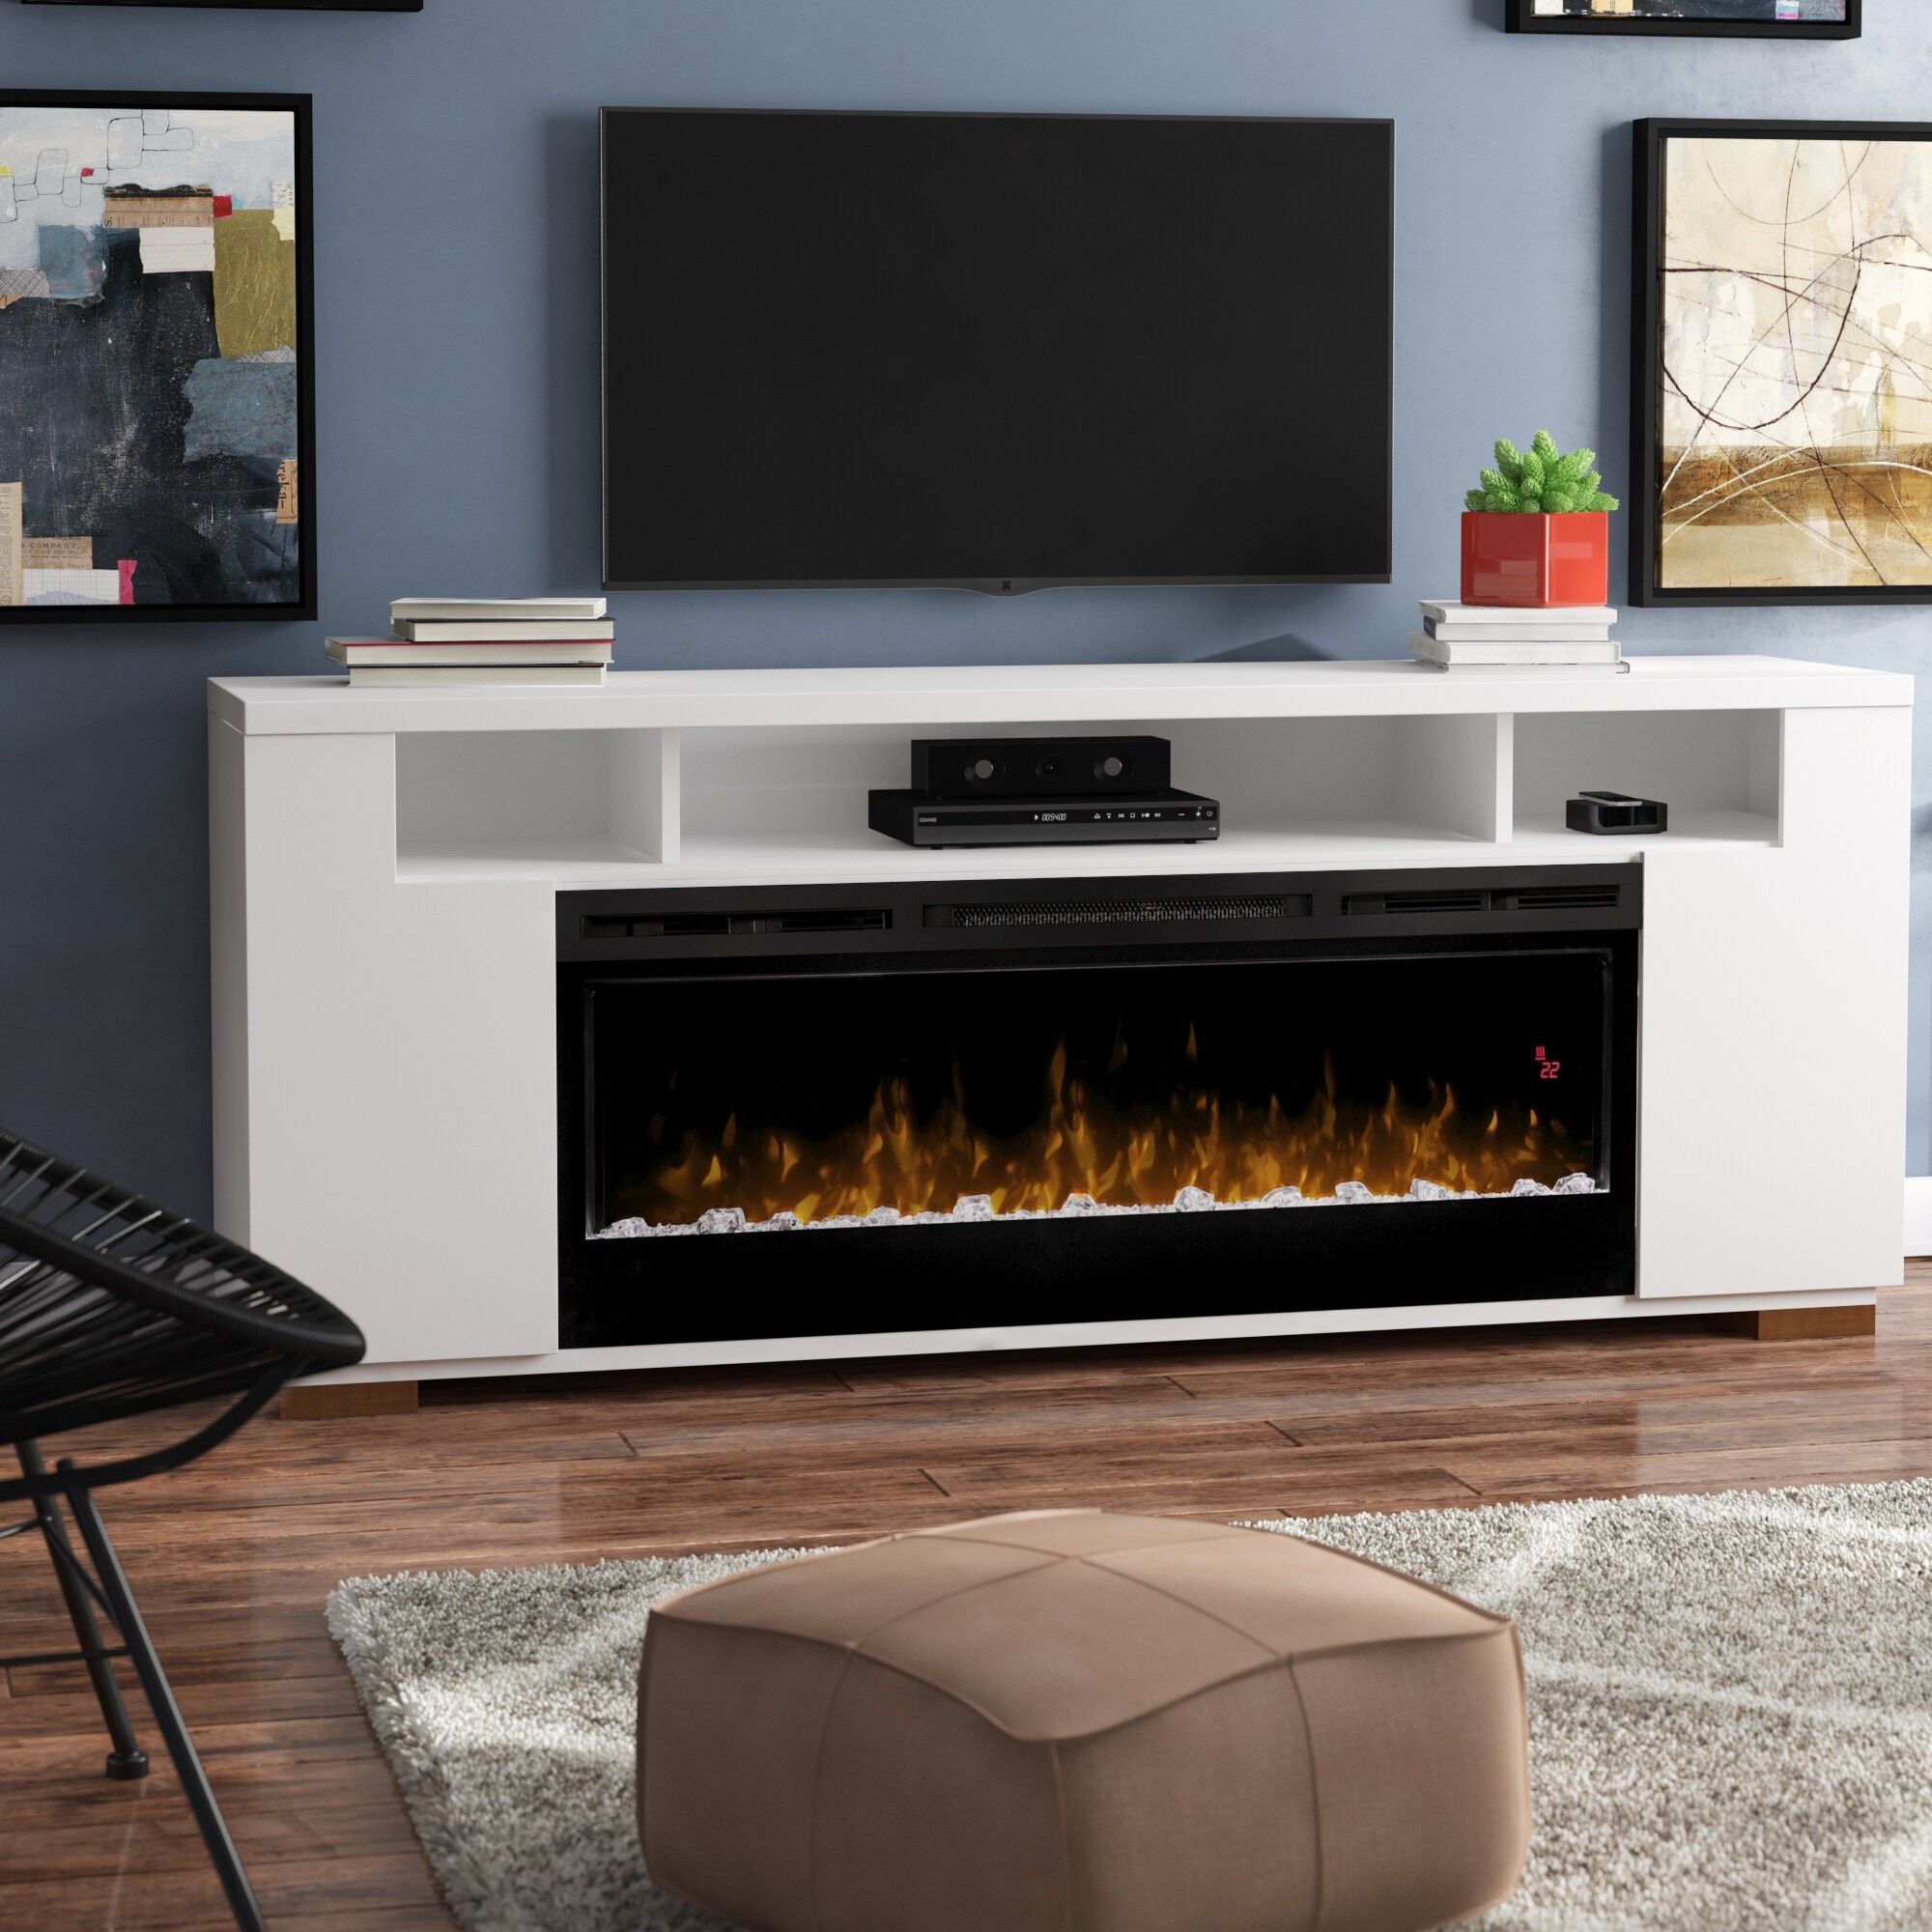 How To Choose A Tv Stand Fireplace – Foter With Modern Fireplace Tv Stands (View 8 of 20)